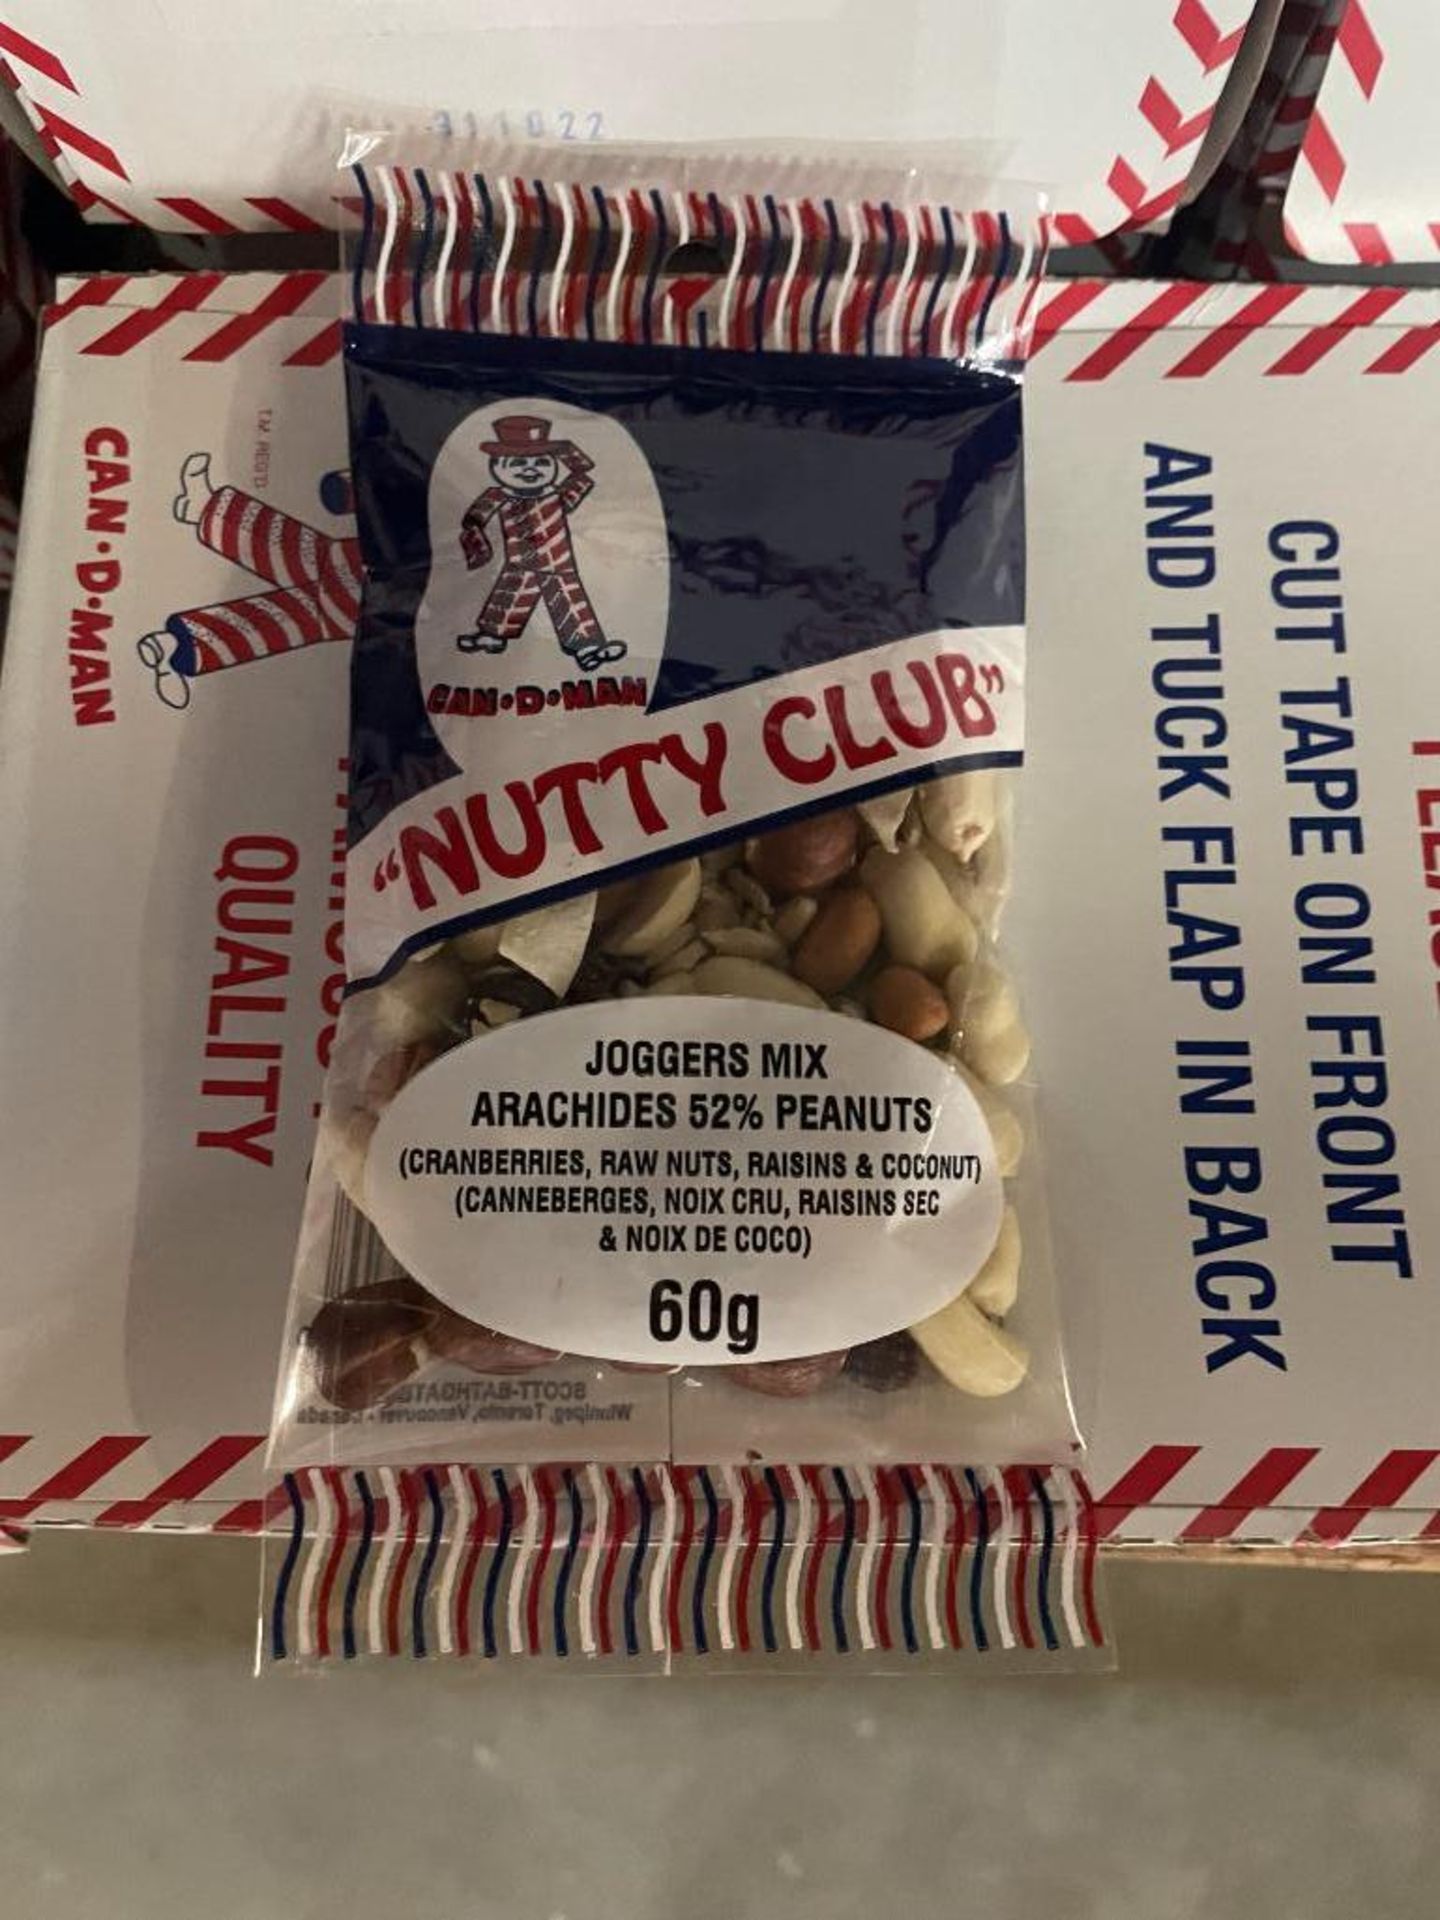 (23) BOXES OF NUTTY CLUB JOGGERS MIX, (11) 12/60G PER BOX & (12) 12/165G PER BOX - Image 2 of 3